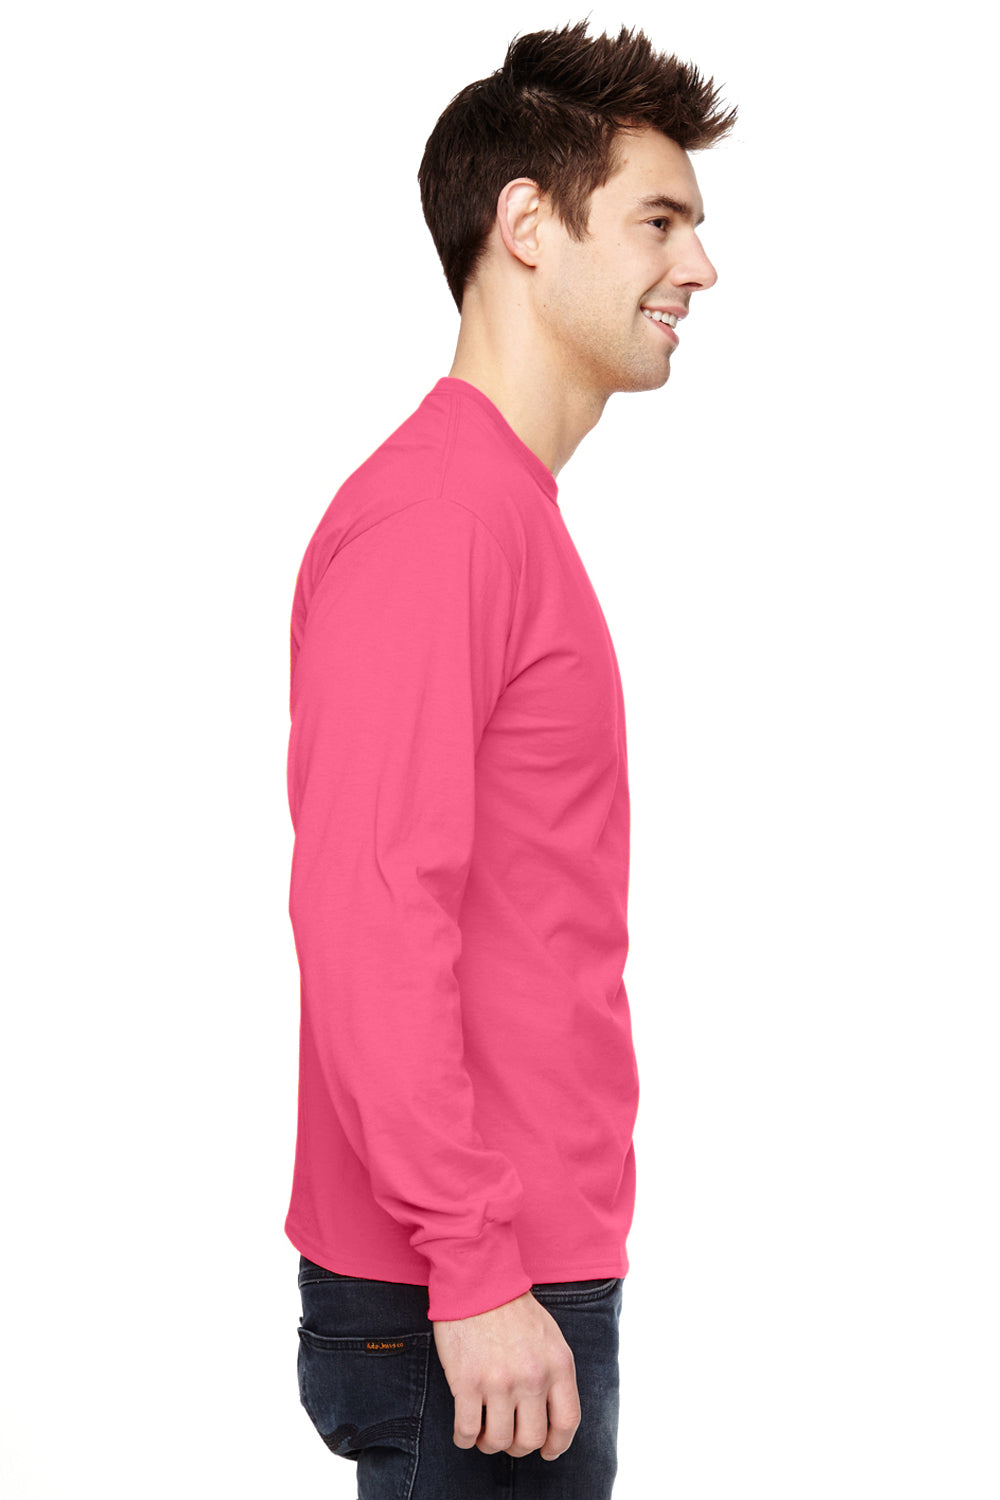 Fruit Of The Loom 4930 Mens HD Jersey Long Sleeve Crewneck T-Shirt Neon Pink Side